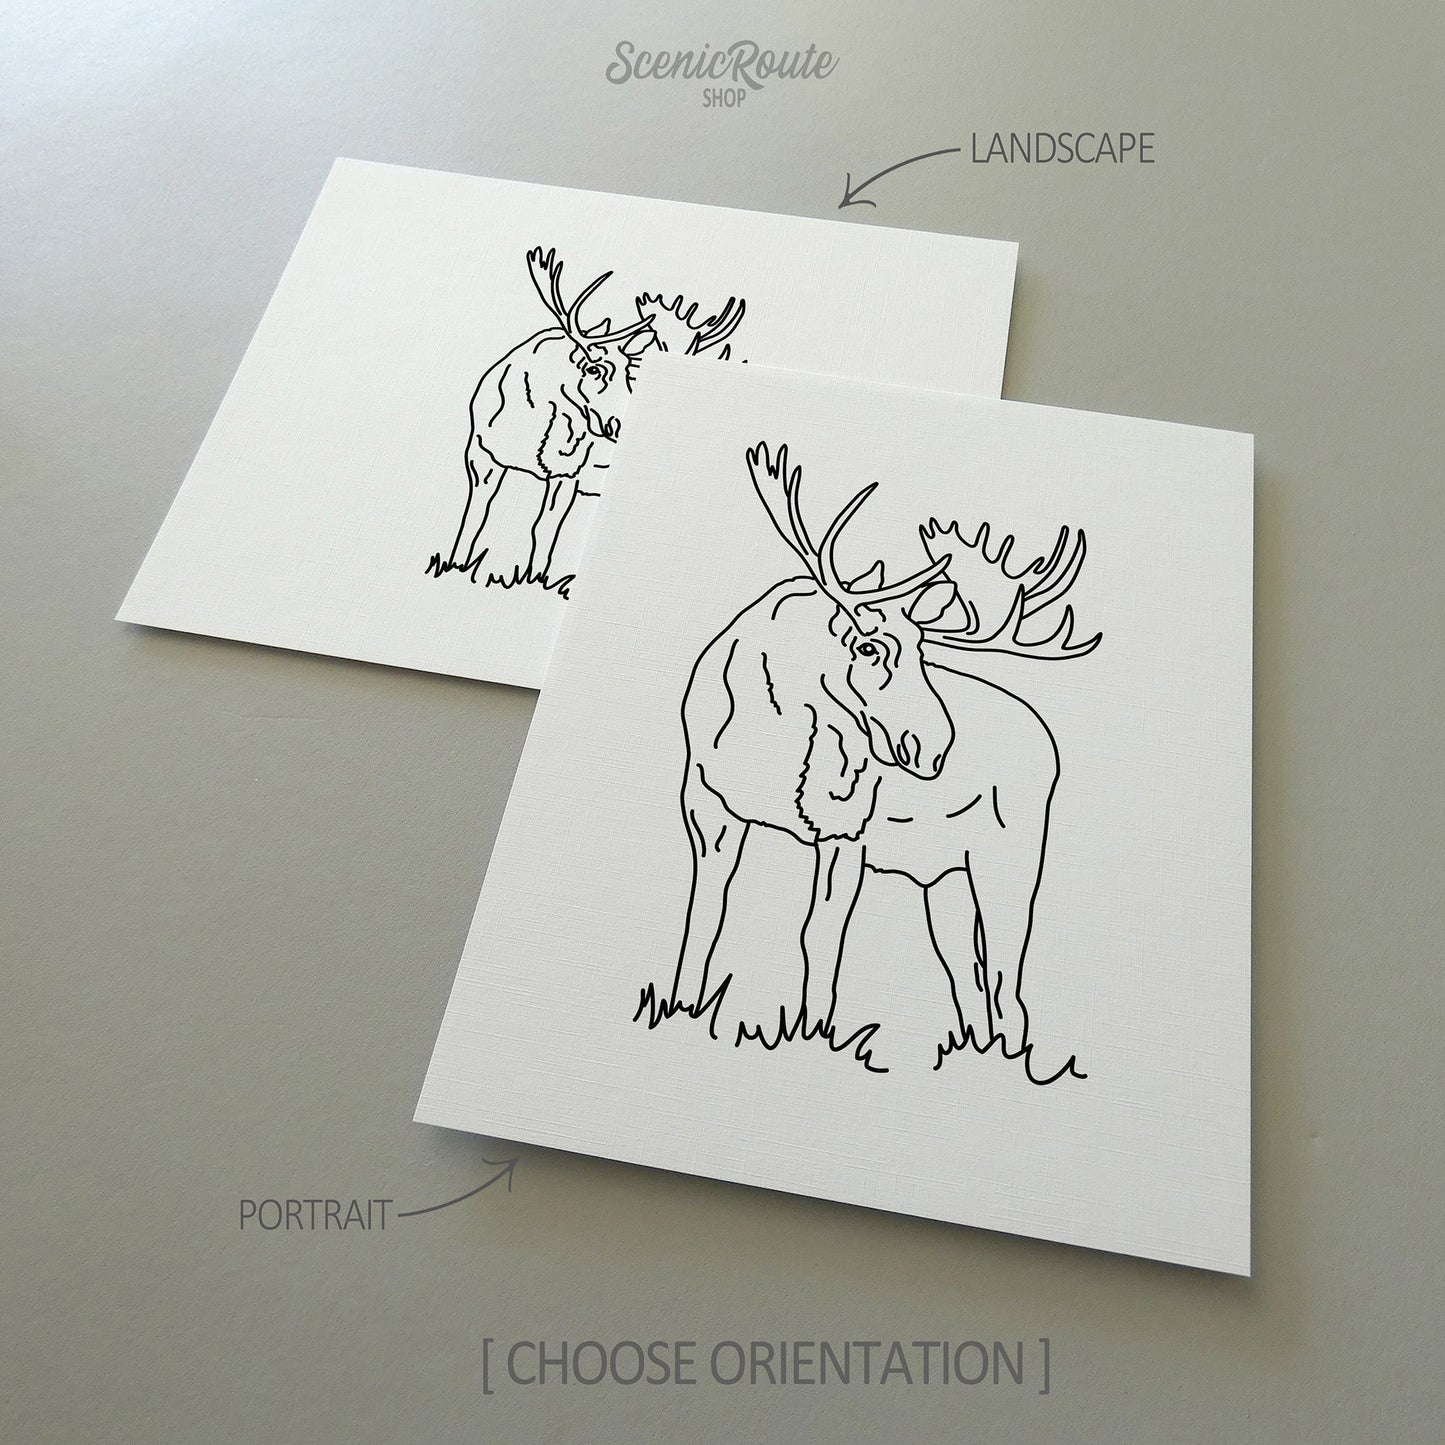 Two line art drawings of a Moose on white linen paper with a gray background.  The pieces are shown in portrait and landscape orientation for the available art print options.